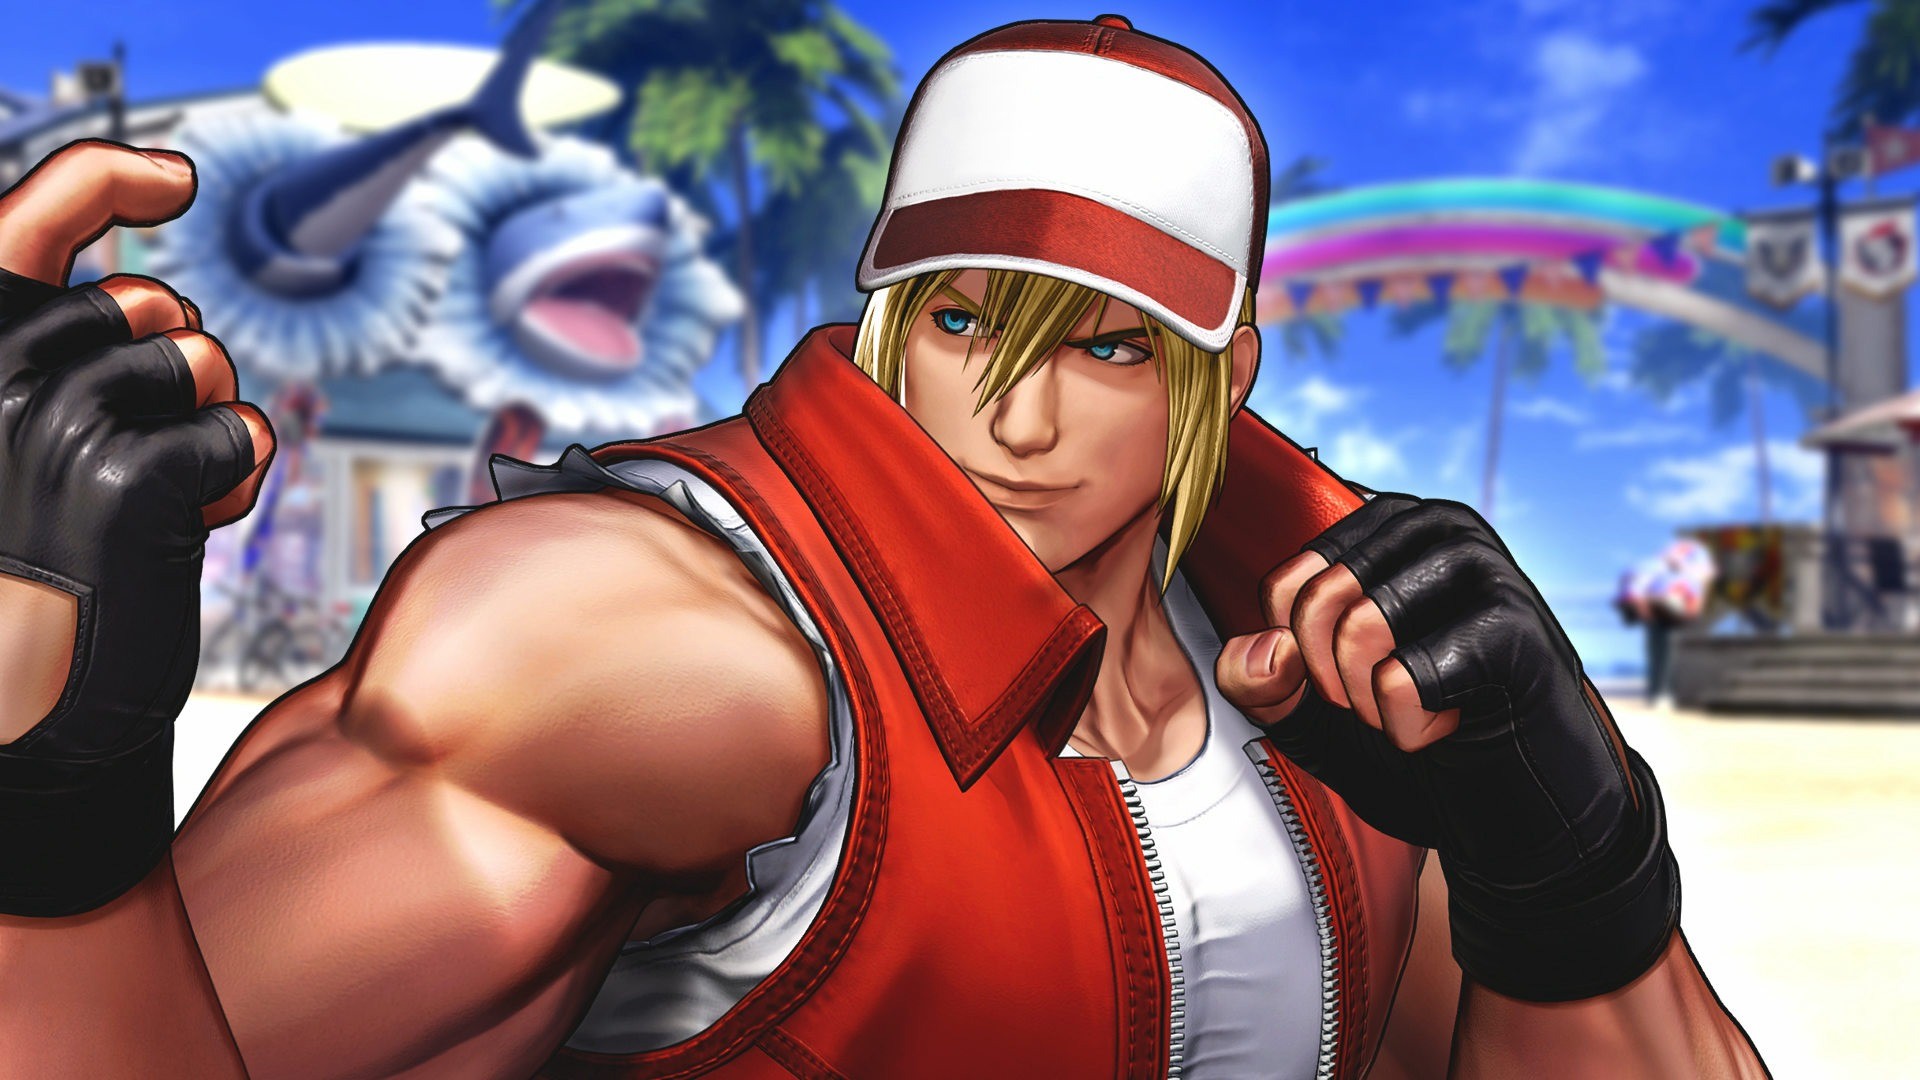 Game de luta The King of Fighters faz 25 anos